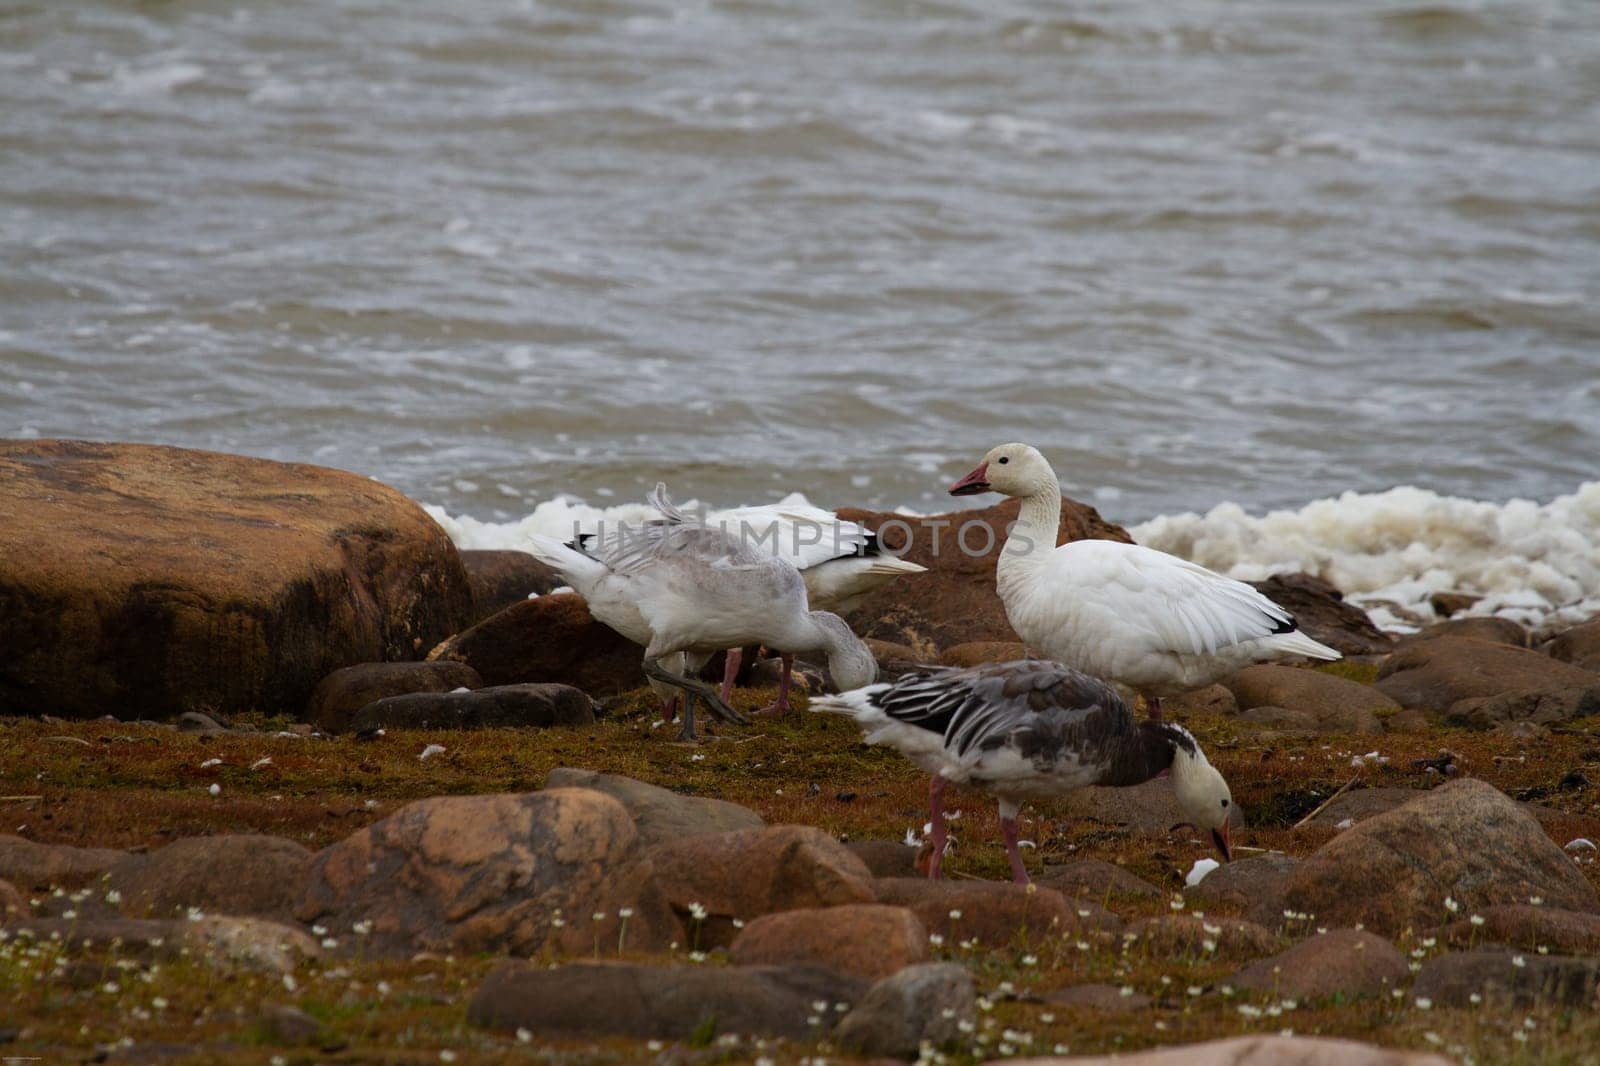 Snow geese in both white and blue morphs searching for food along arctic shoreline by Granchinho